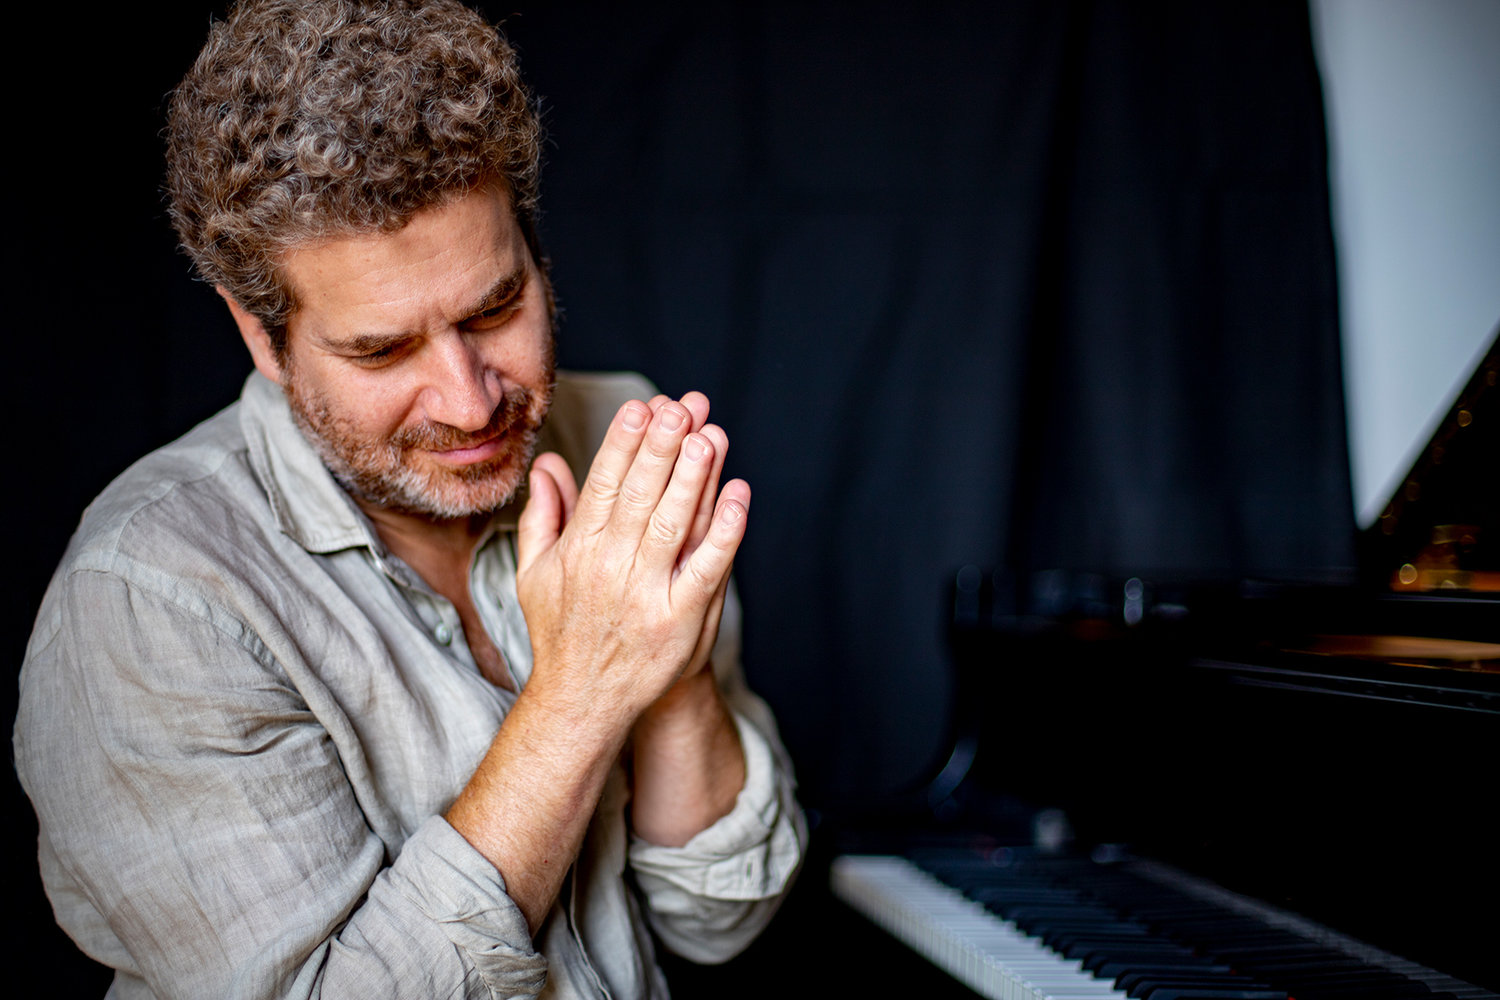 Jazz pianist Kevin Hays will perform at the Tusten Theatre this weekend.